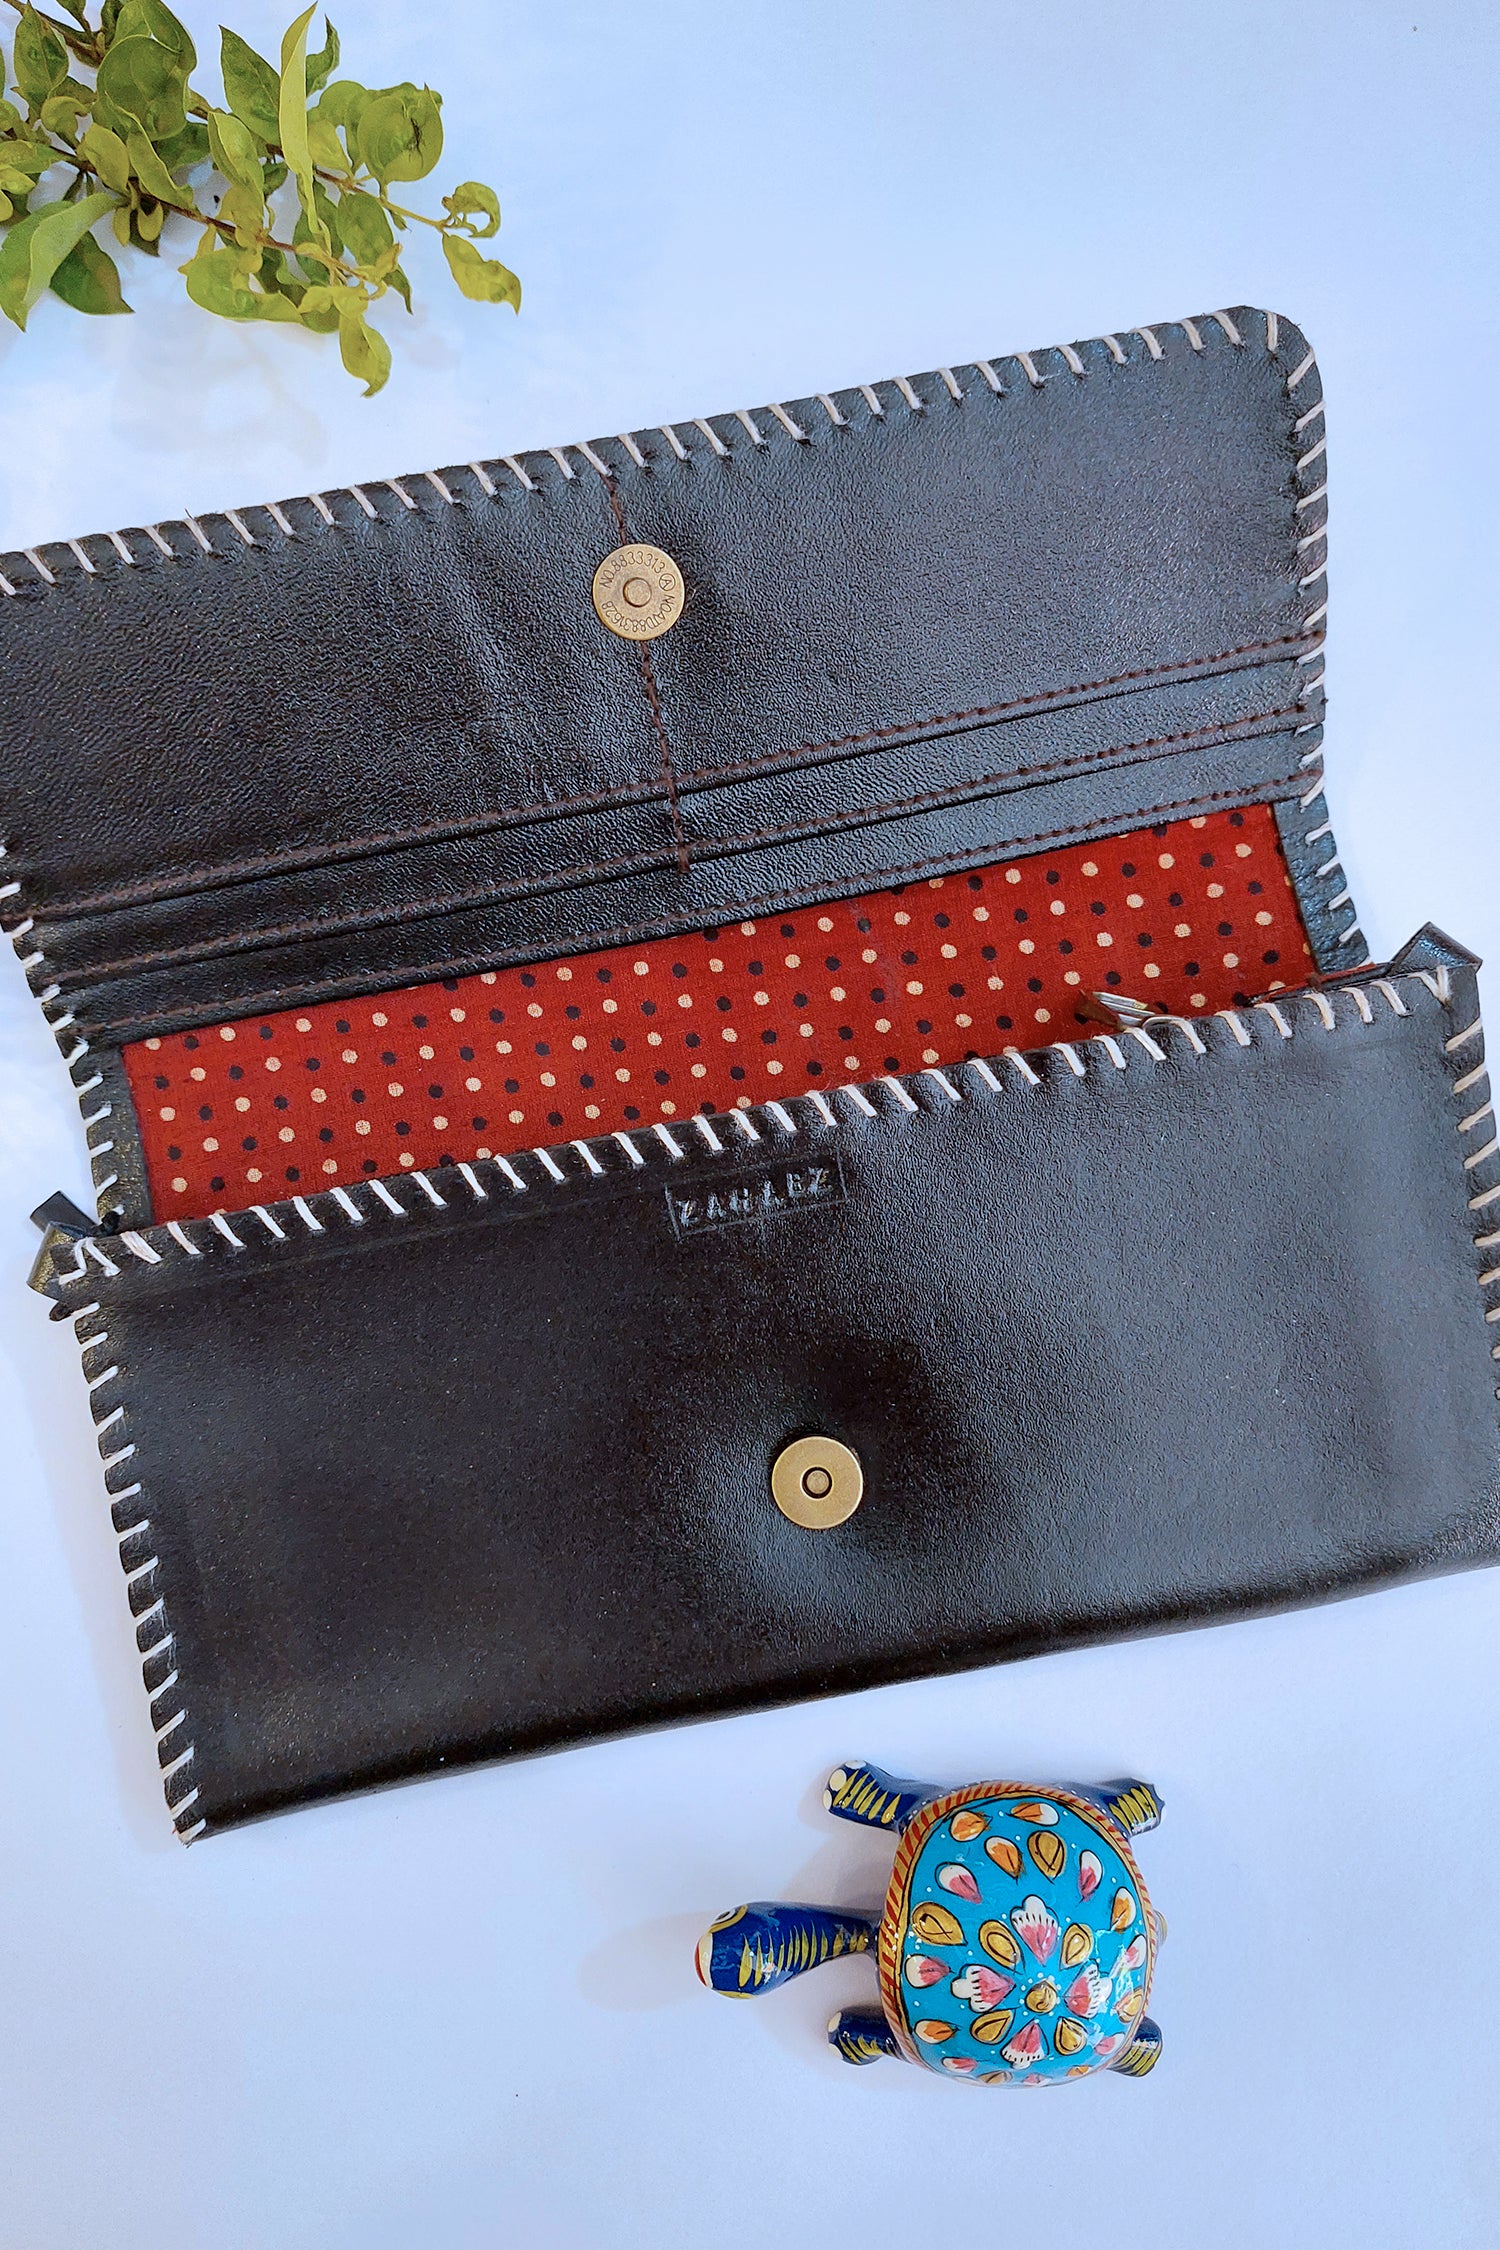 Handcrafted Genuine Leather Wallet with Jat Embroidery and Detachable Sling Sling Bag Handcrafted Genuine Leather Wallet with Jat Embroidery and Detachable Sling Sling Bag Handcrafted Genuine Leather Wallet with Jat Embroidery and Detachable Sling Sling Bag 